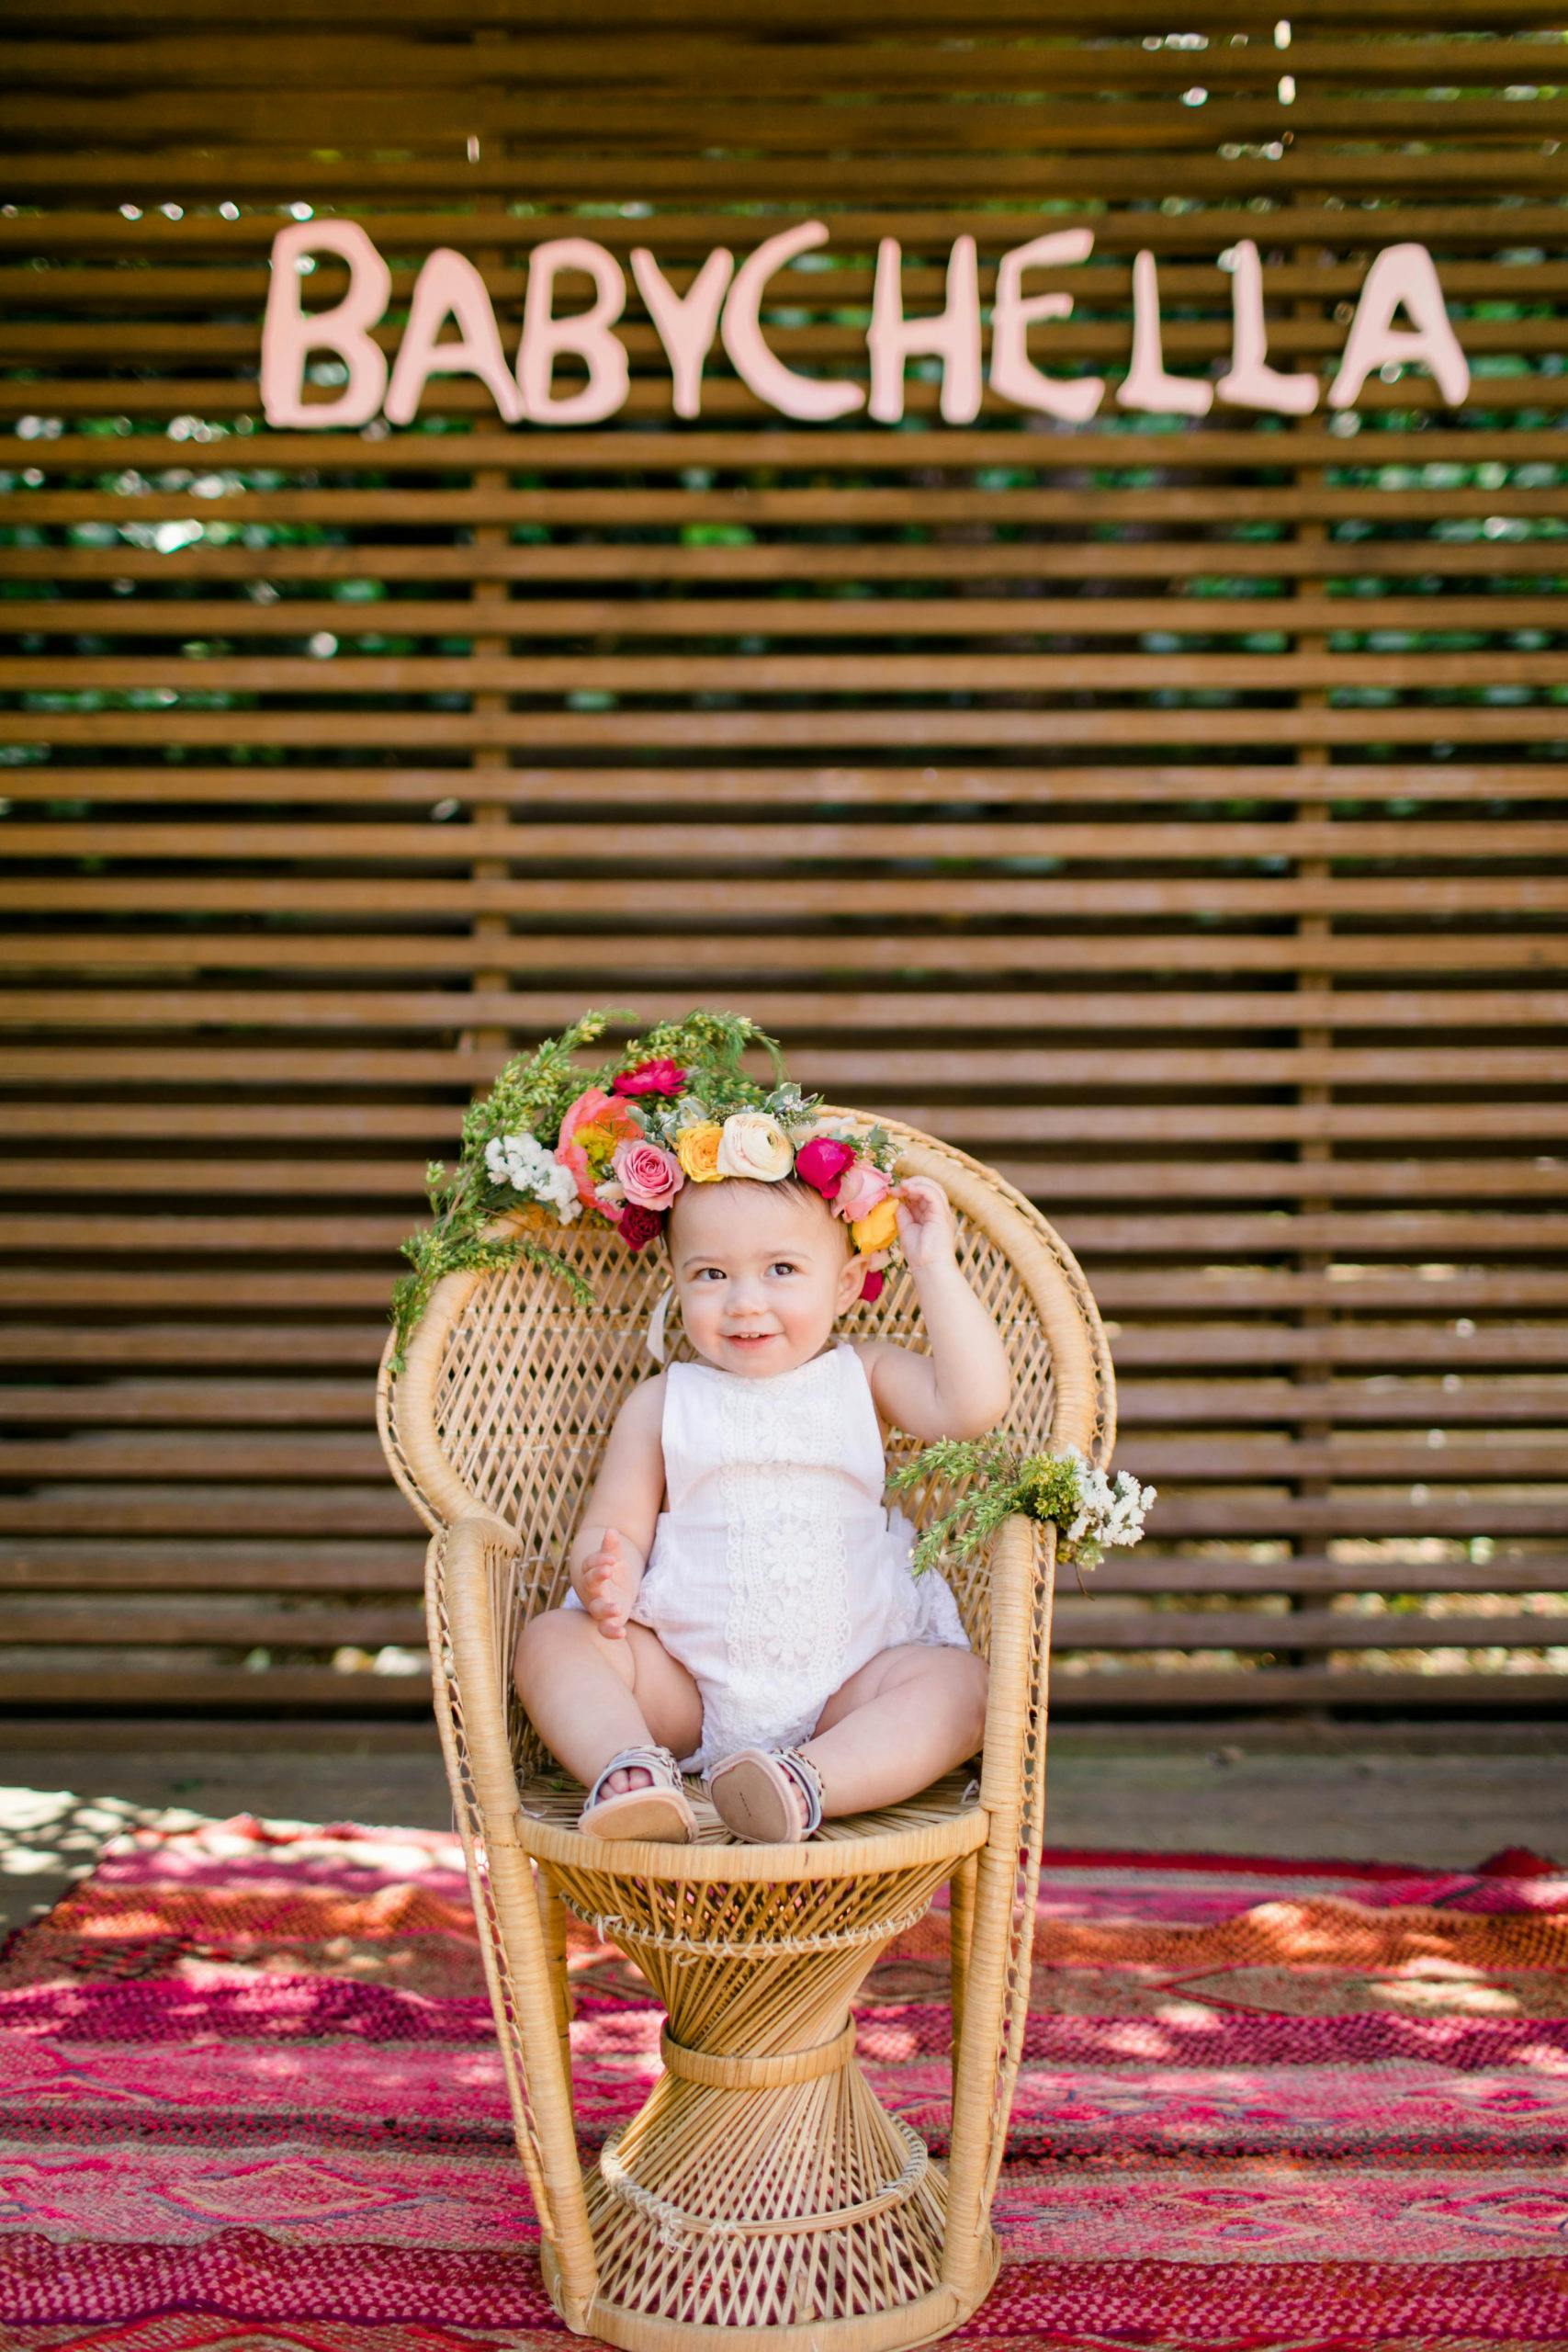 BabyChella Coachella Inspired Kids Birthday Party Idea with Baby Sitting in a Wicker Chair with a Flower Crown | PartySlate